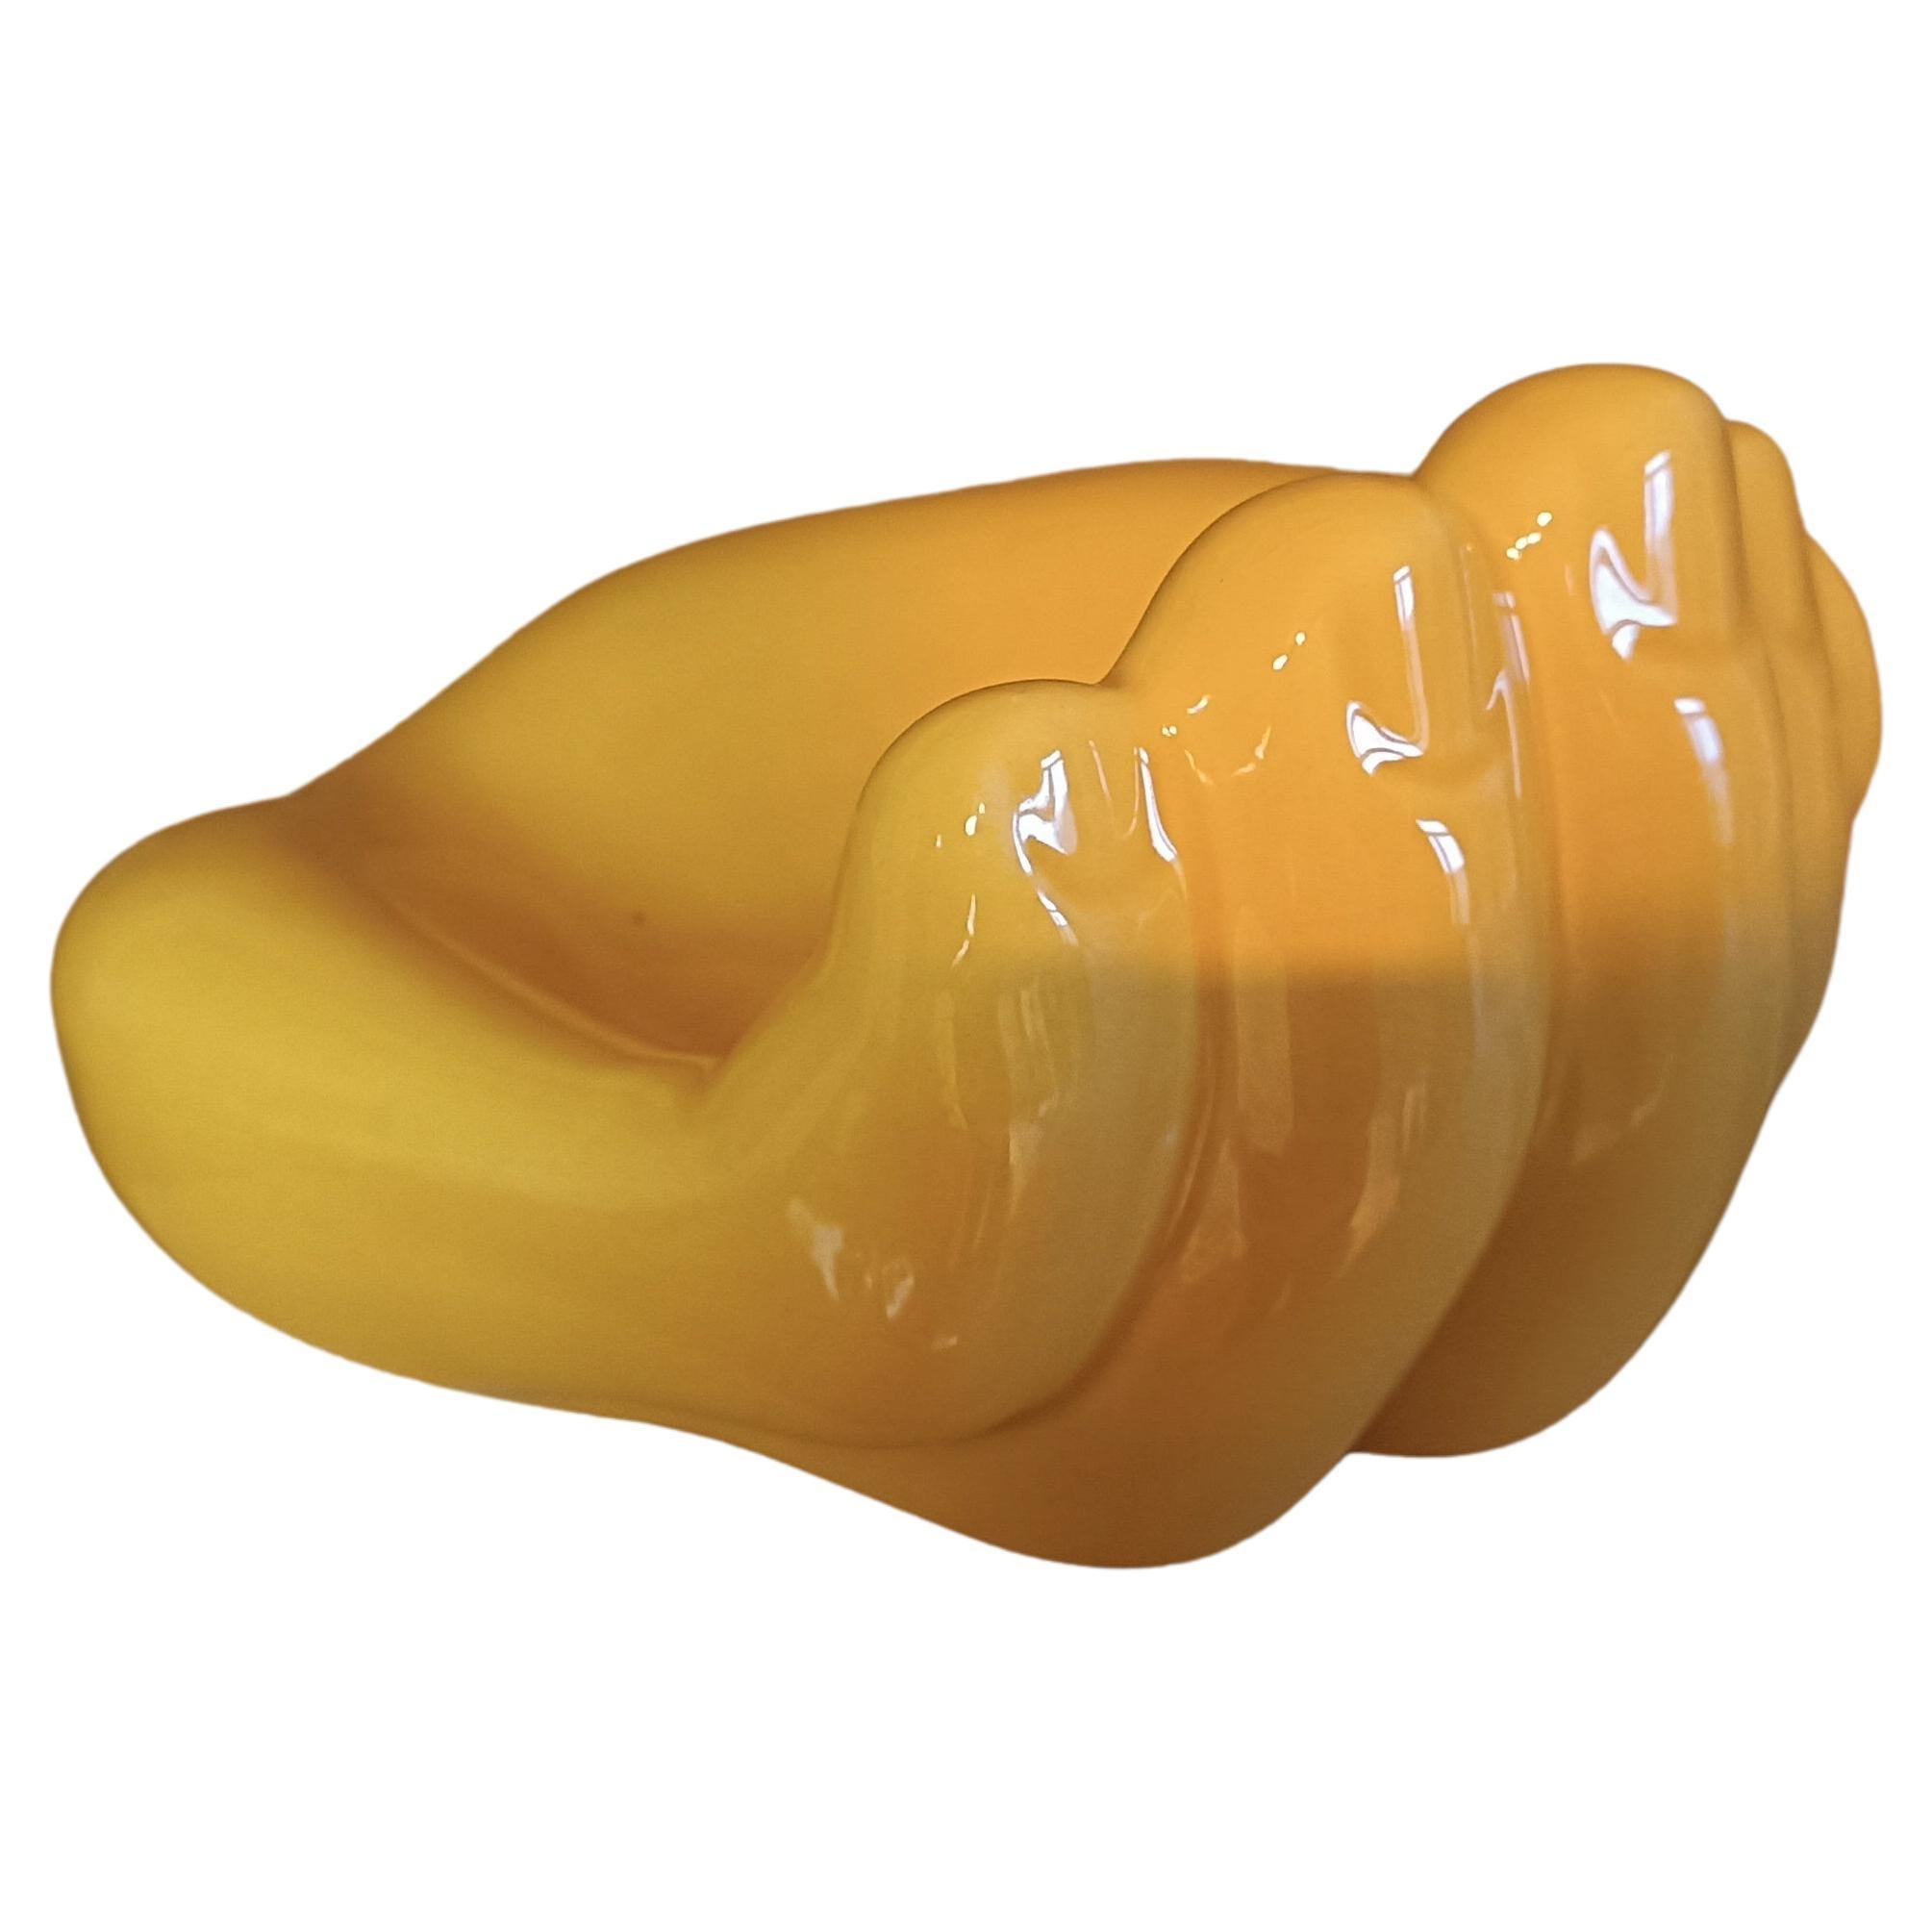 French ceramic Vide Poche circa 1960s - in the style of Georges Jouve, Ruelland

Large hand-shaped pocket organizer. Mid-century plaster enameled with glossy yellow enamel circa 1960s.
In the style of the bear-paw-shaped vide poche by Georges Jouve,